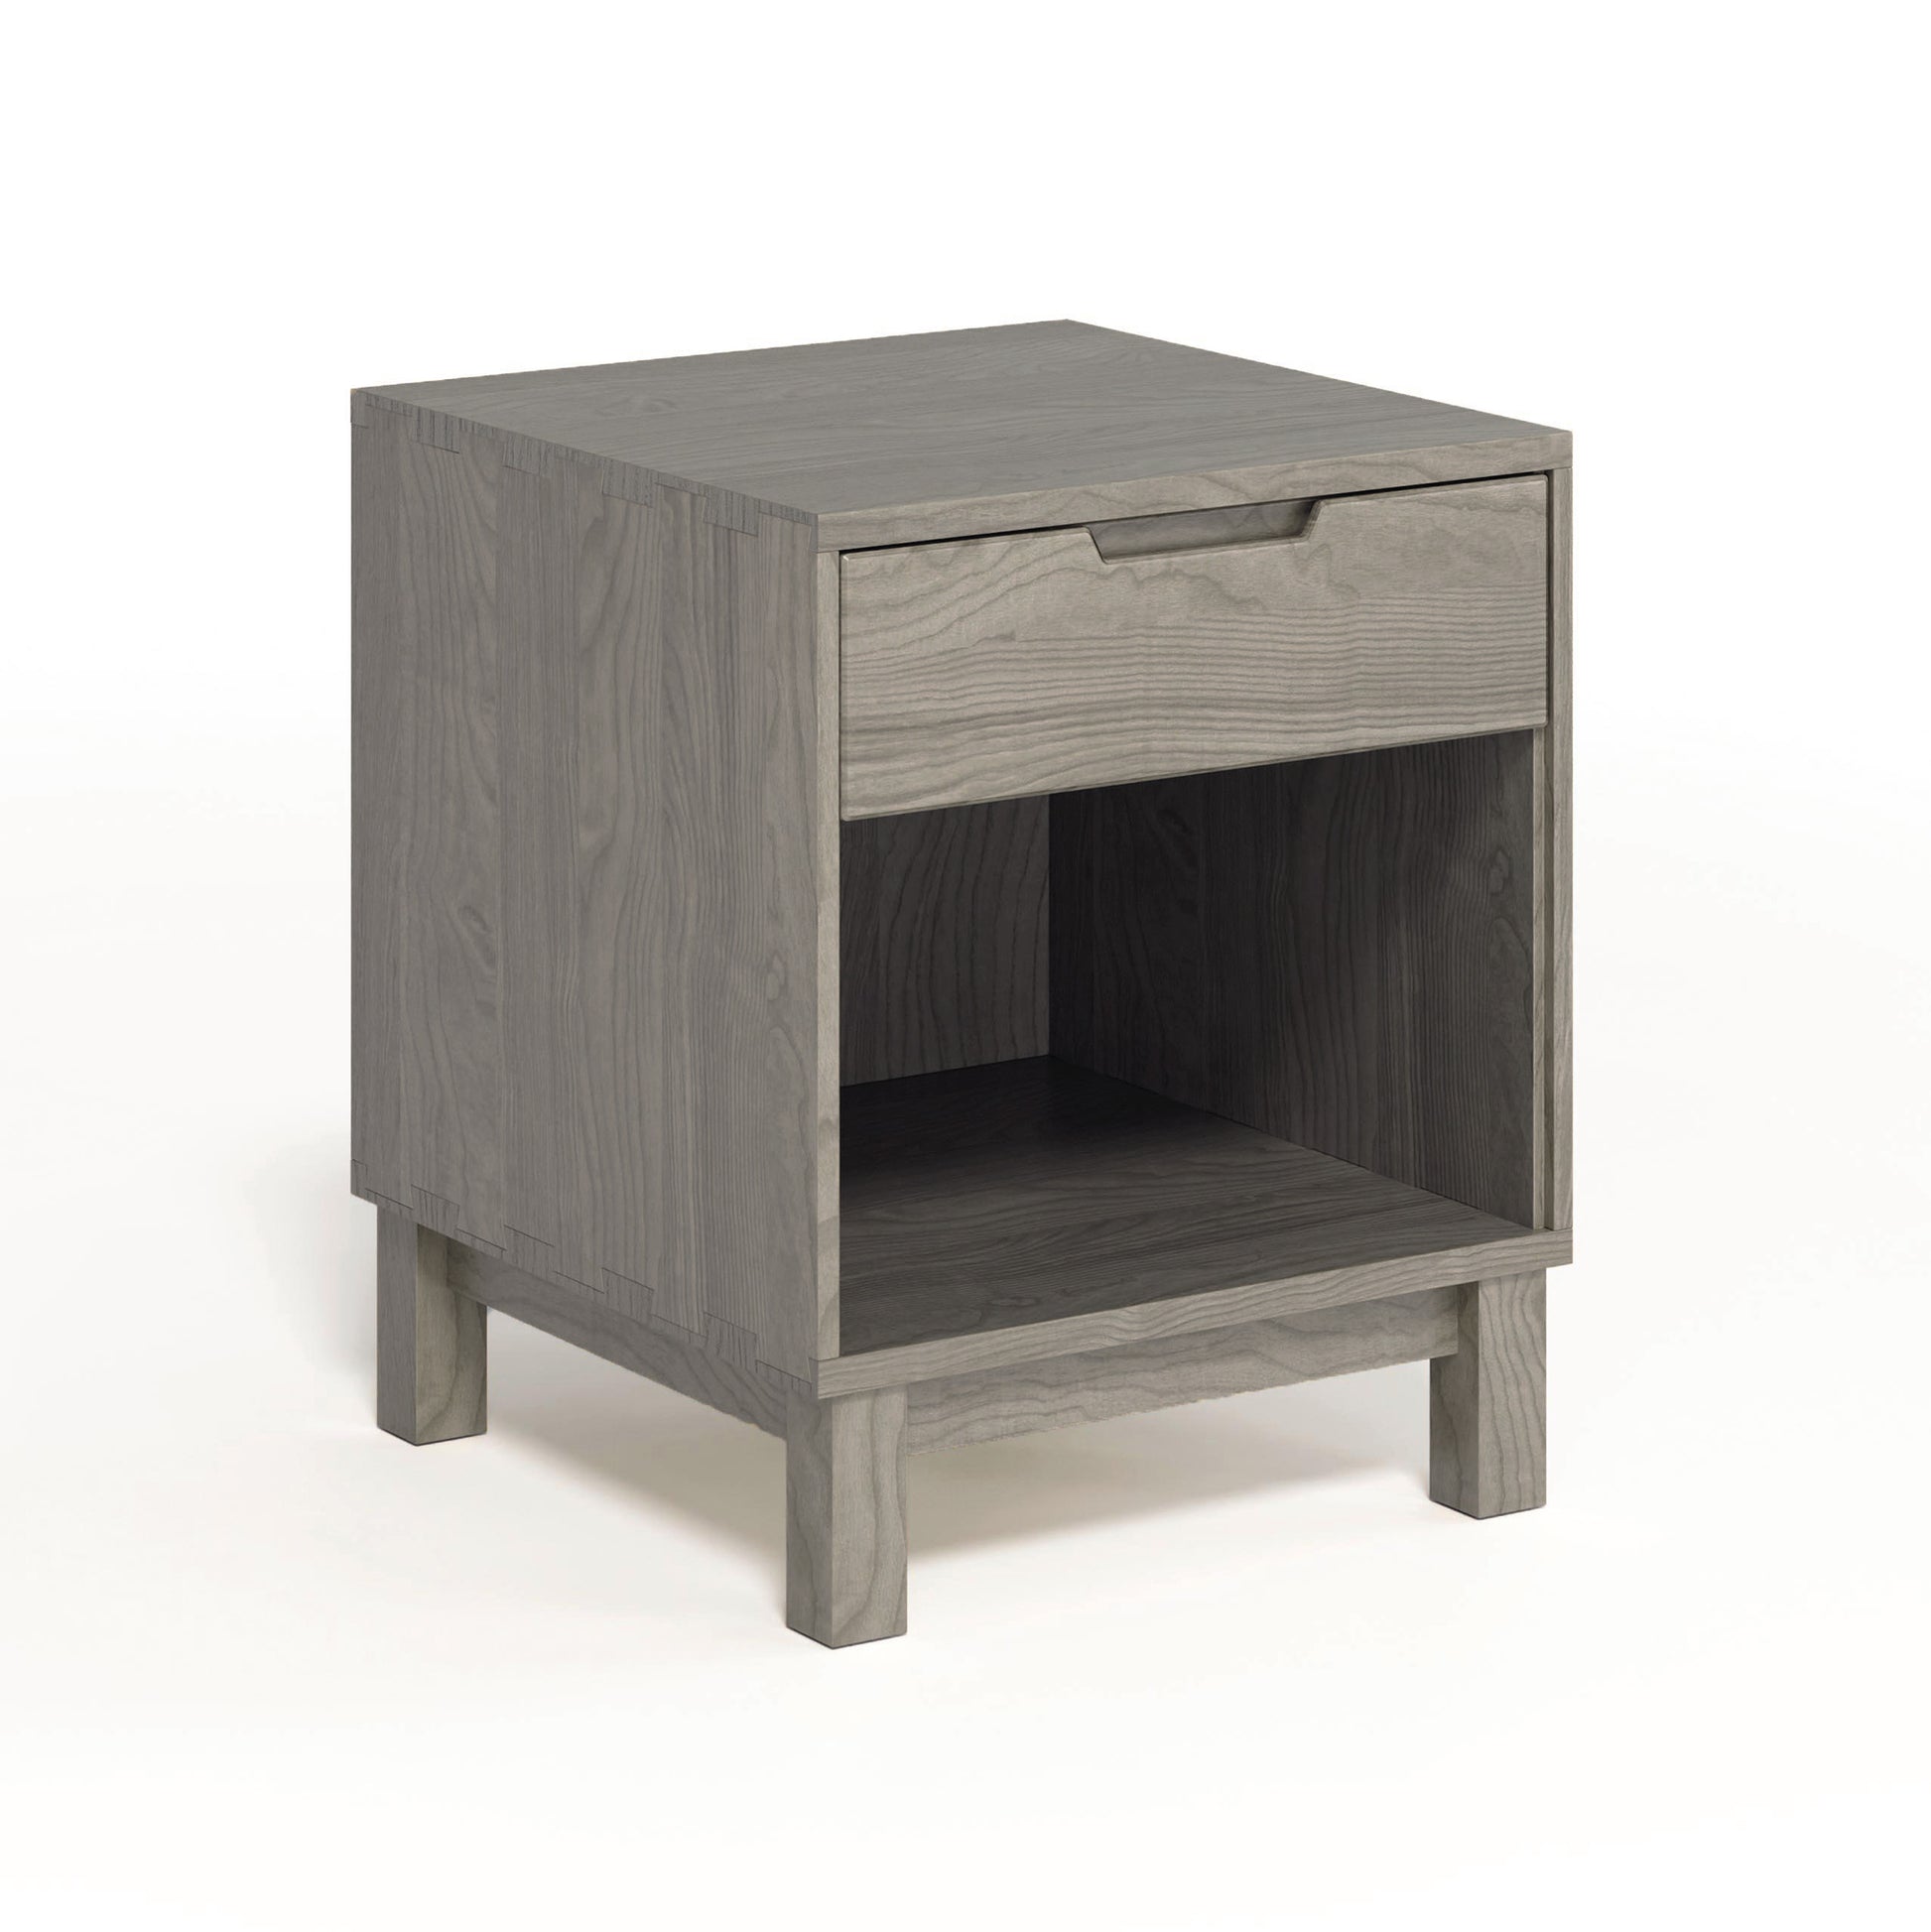 A Copeland Furniture Oslo 1-Drawer Enclosed Shelf Nightstand with a single drawer and an enclosed lower shelf, featuring a gray finish, photographed against a white background.